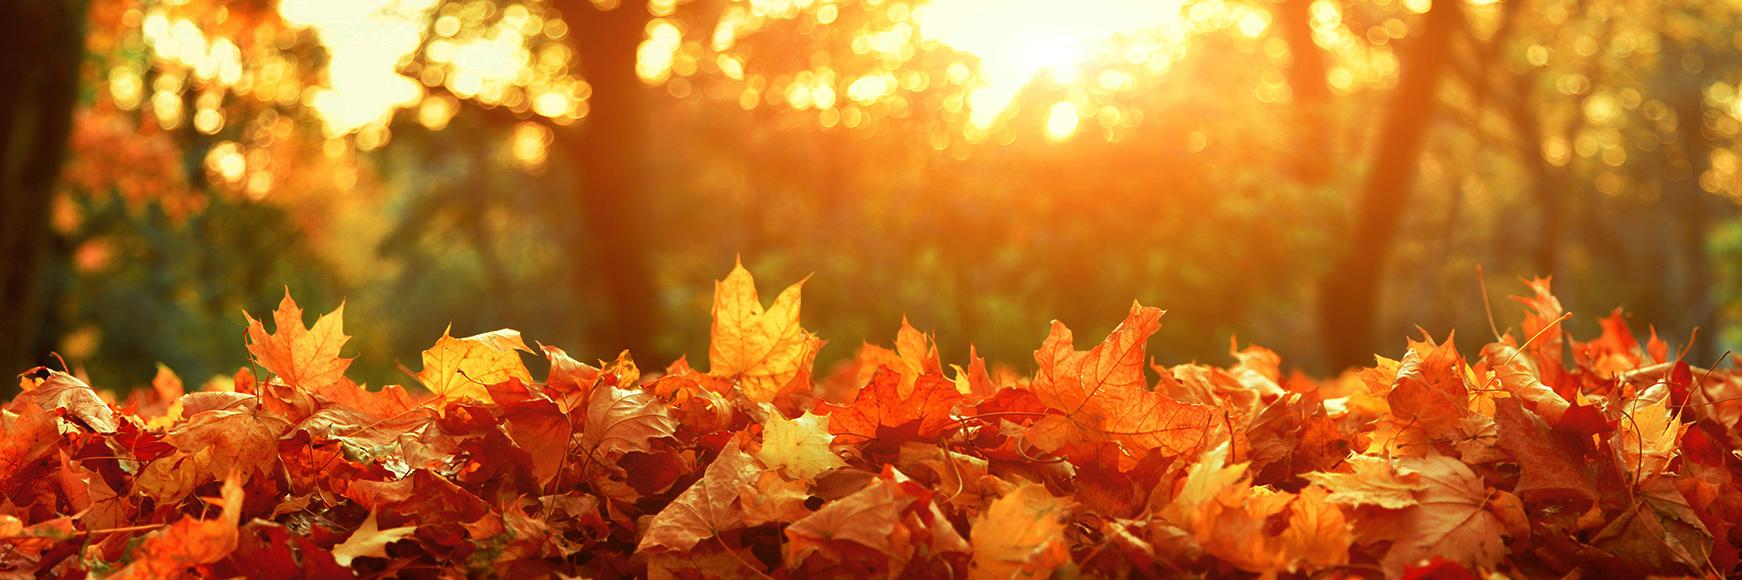 Five activities to try on an Autumn Day banner image